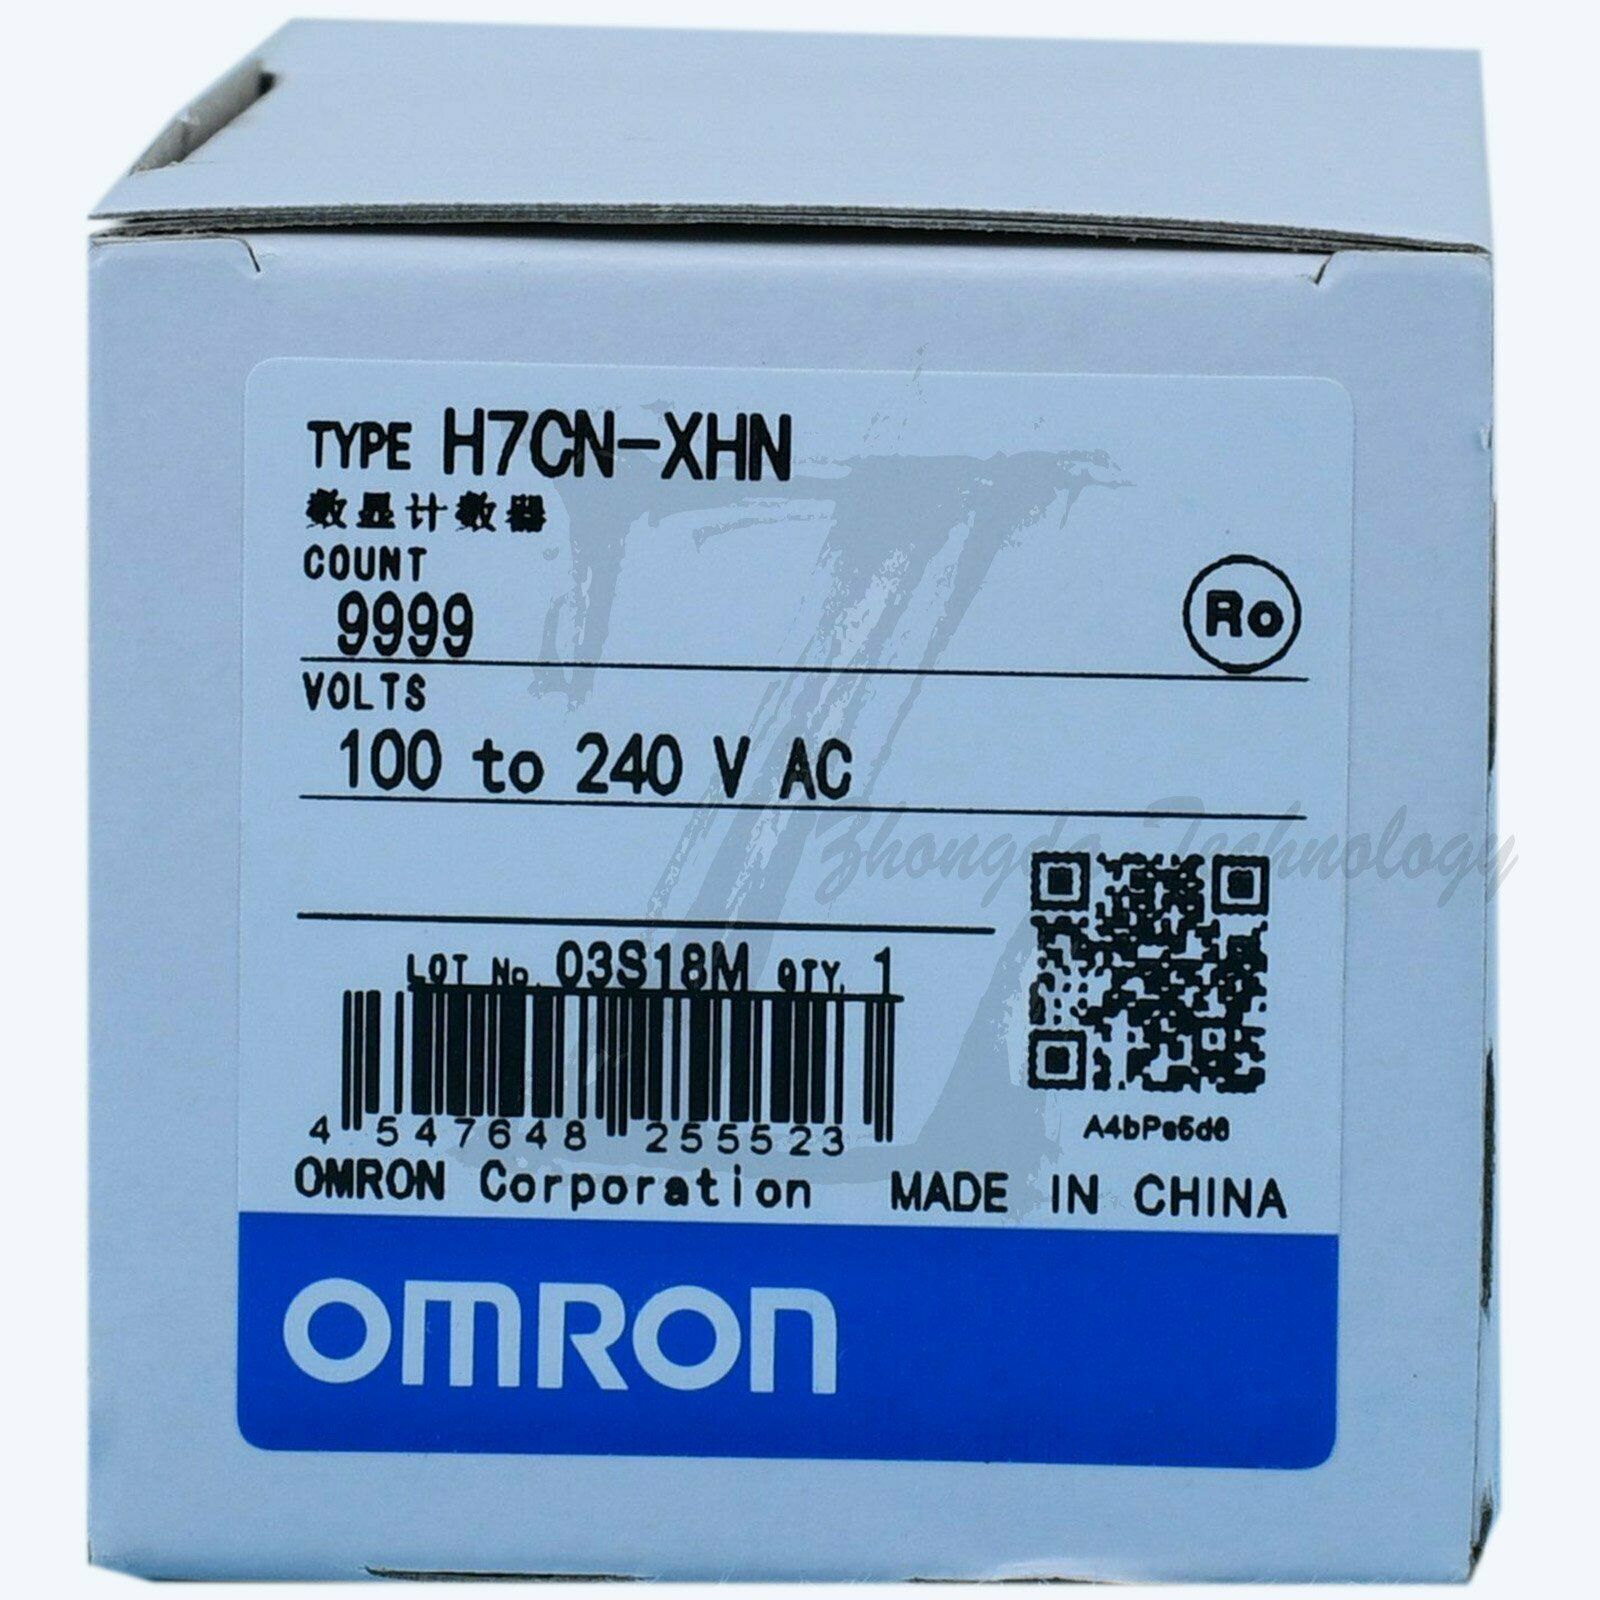 1PC new Omron counter H7CN-XHN module one year warranty KOEED 1, 80%, import_2020_10_10_031751, Omron, Other